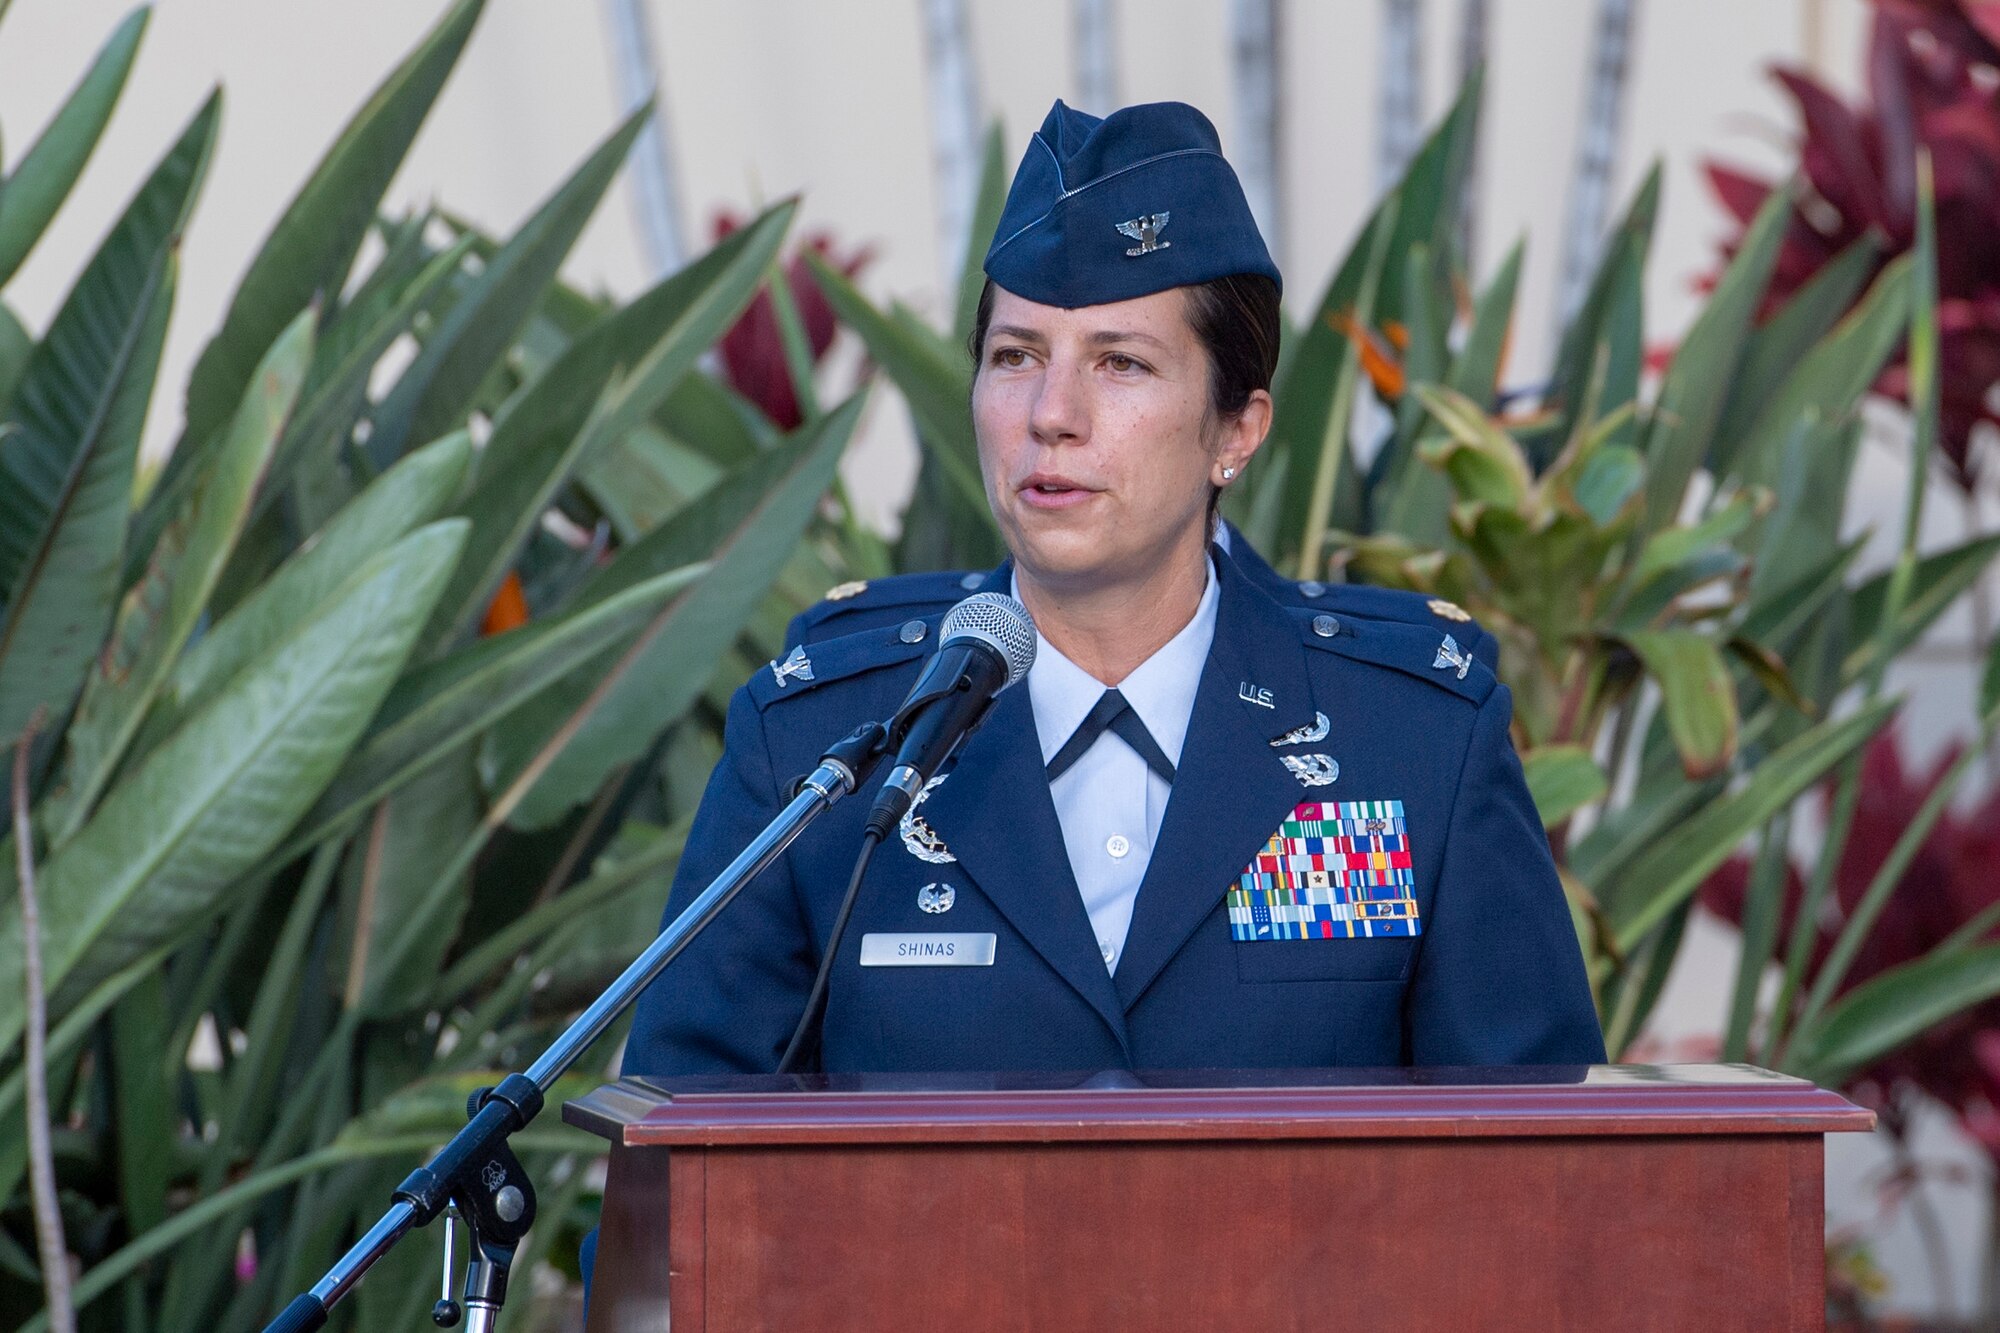 A photo of U.S. Air Force Col. Athanasia Shinas, 624th Regional Support Group commander, speaking to audience members during the 624th Aeromedical Staging Squadron change of command ceremony in front of the 15th Medical Group building at Joint Base Pearl Harbor-Hickam, Hawaii, Aug. 8, 2020.